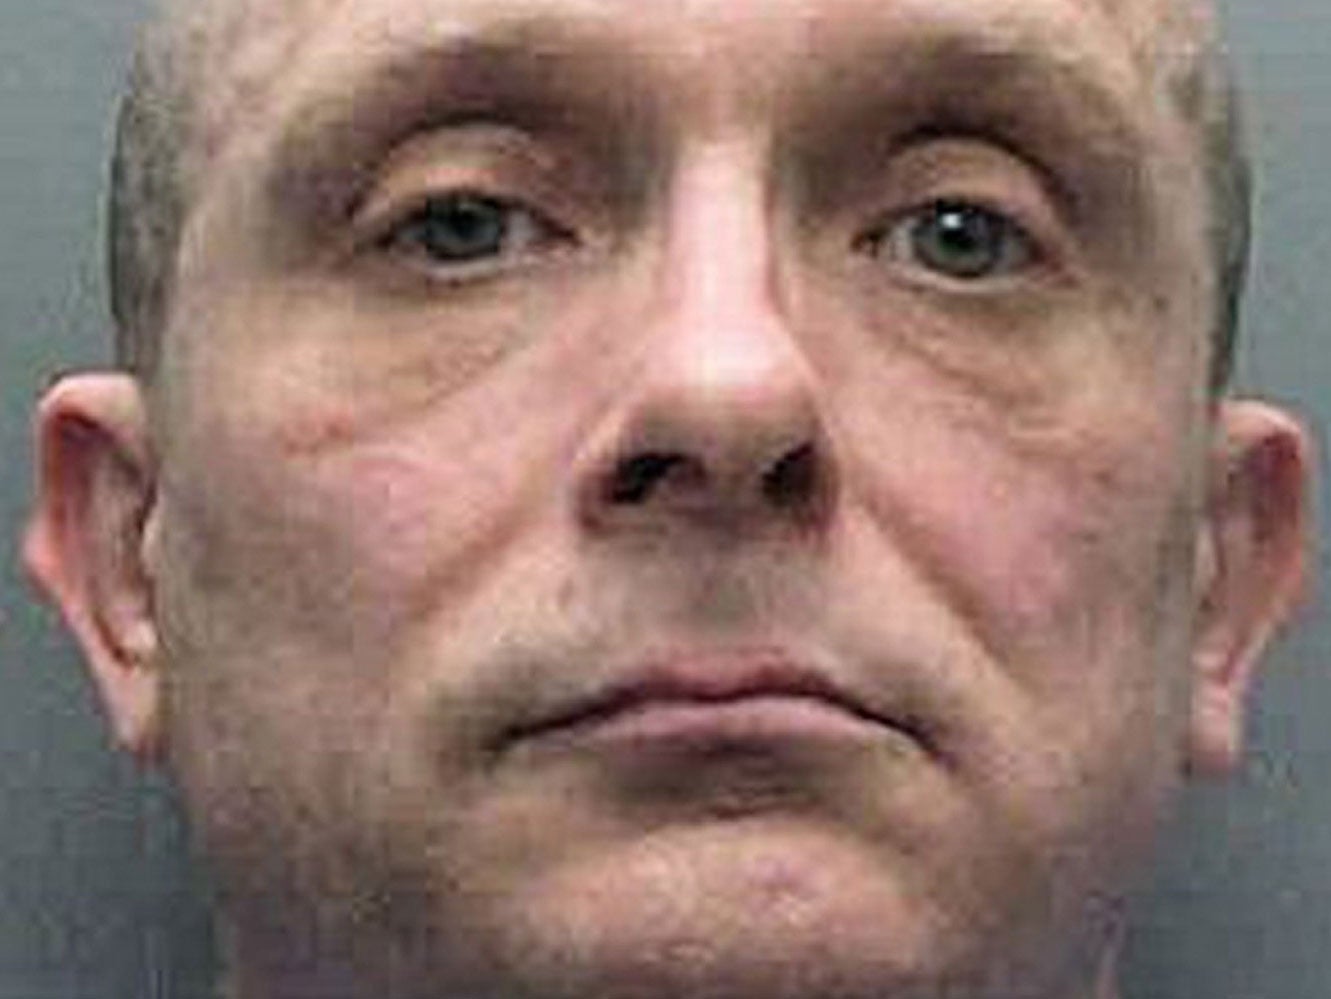 In 1987 Russell Bishop was acquitted of murdering 'Babes in the Wood' Karen Hadaway and Nicola Fellows. He went on to commit another paedophile sex attack